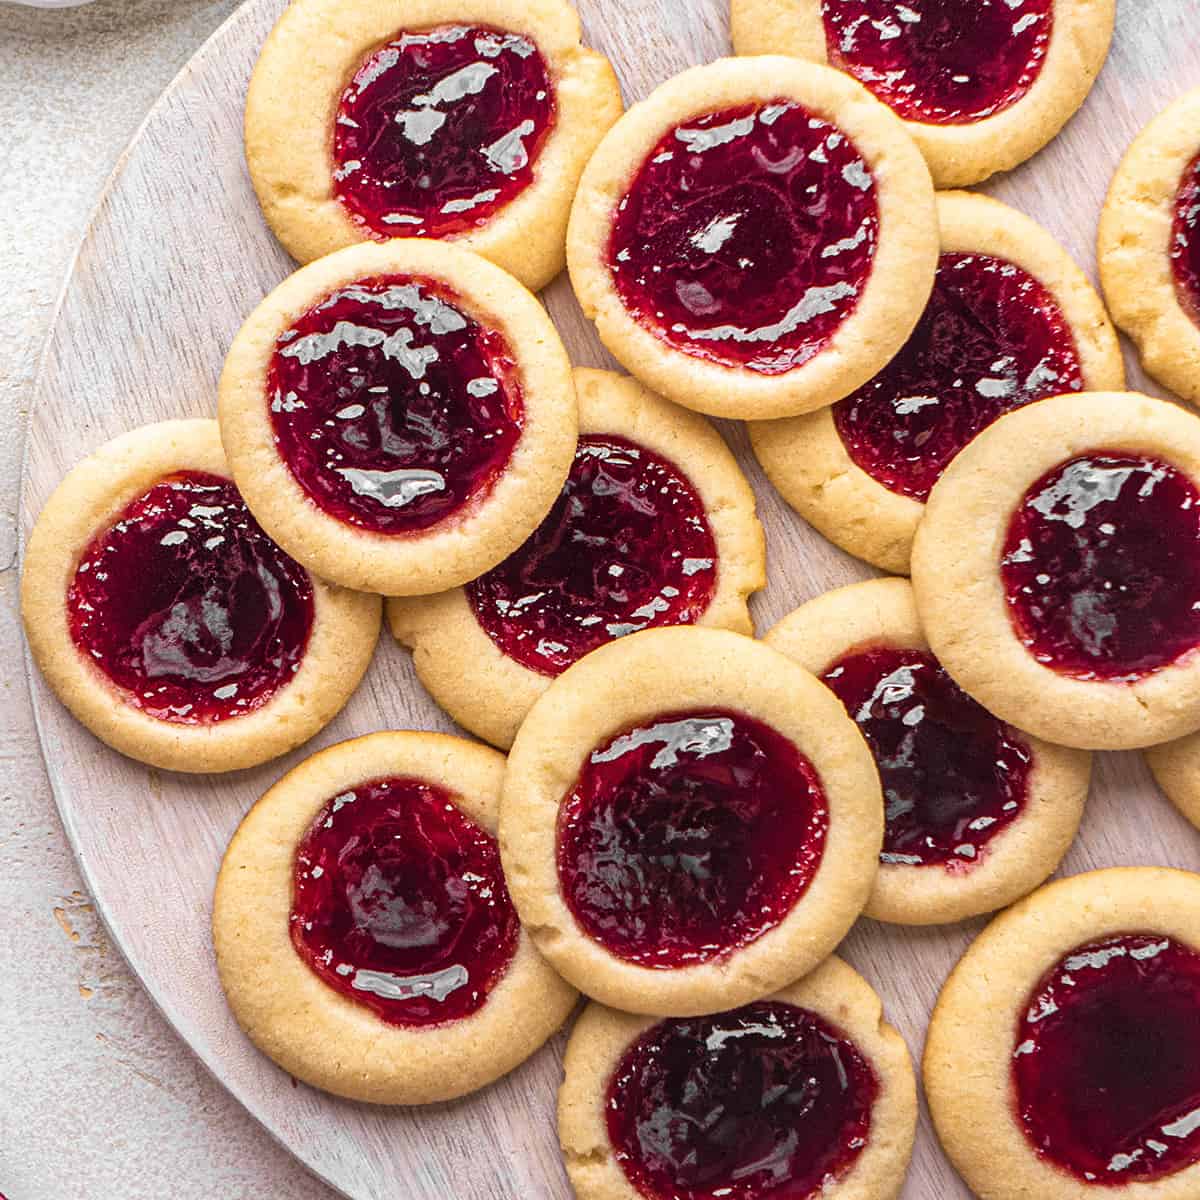 14 Thumbprint Cookies arranged on a wooden serving tray